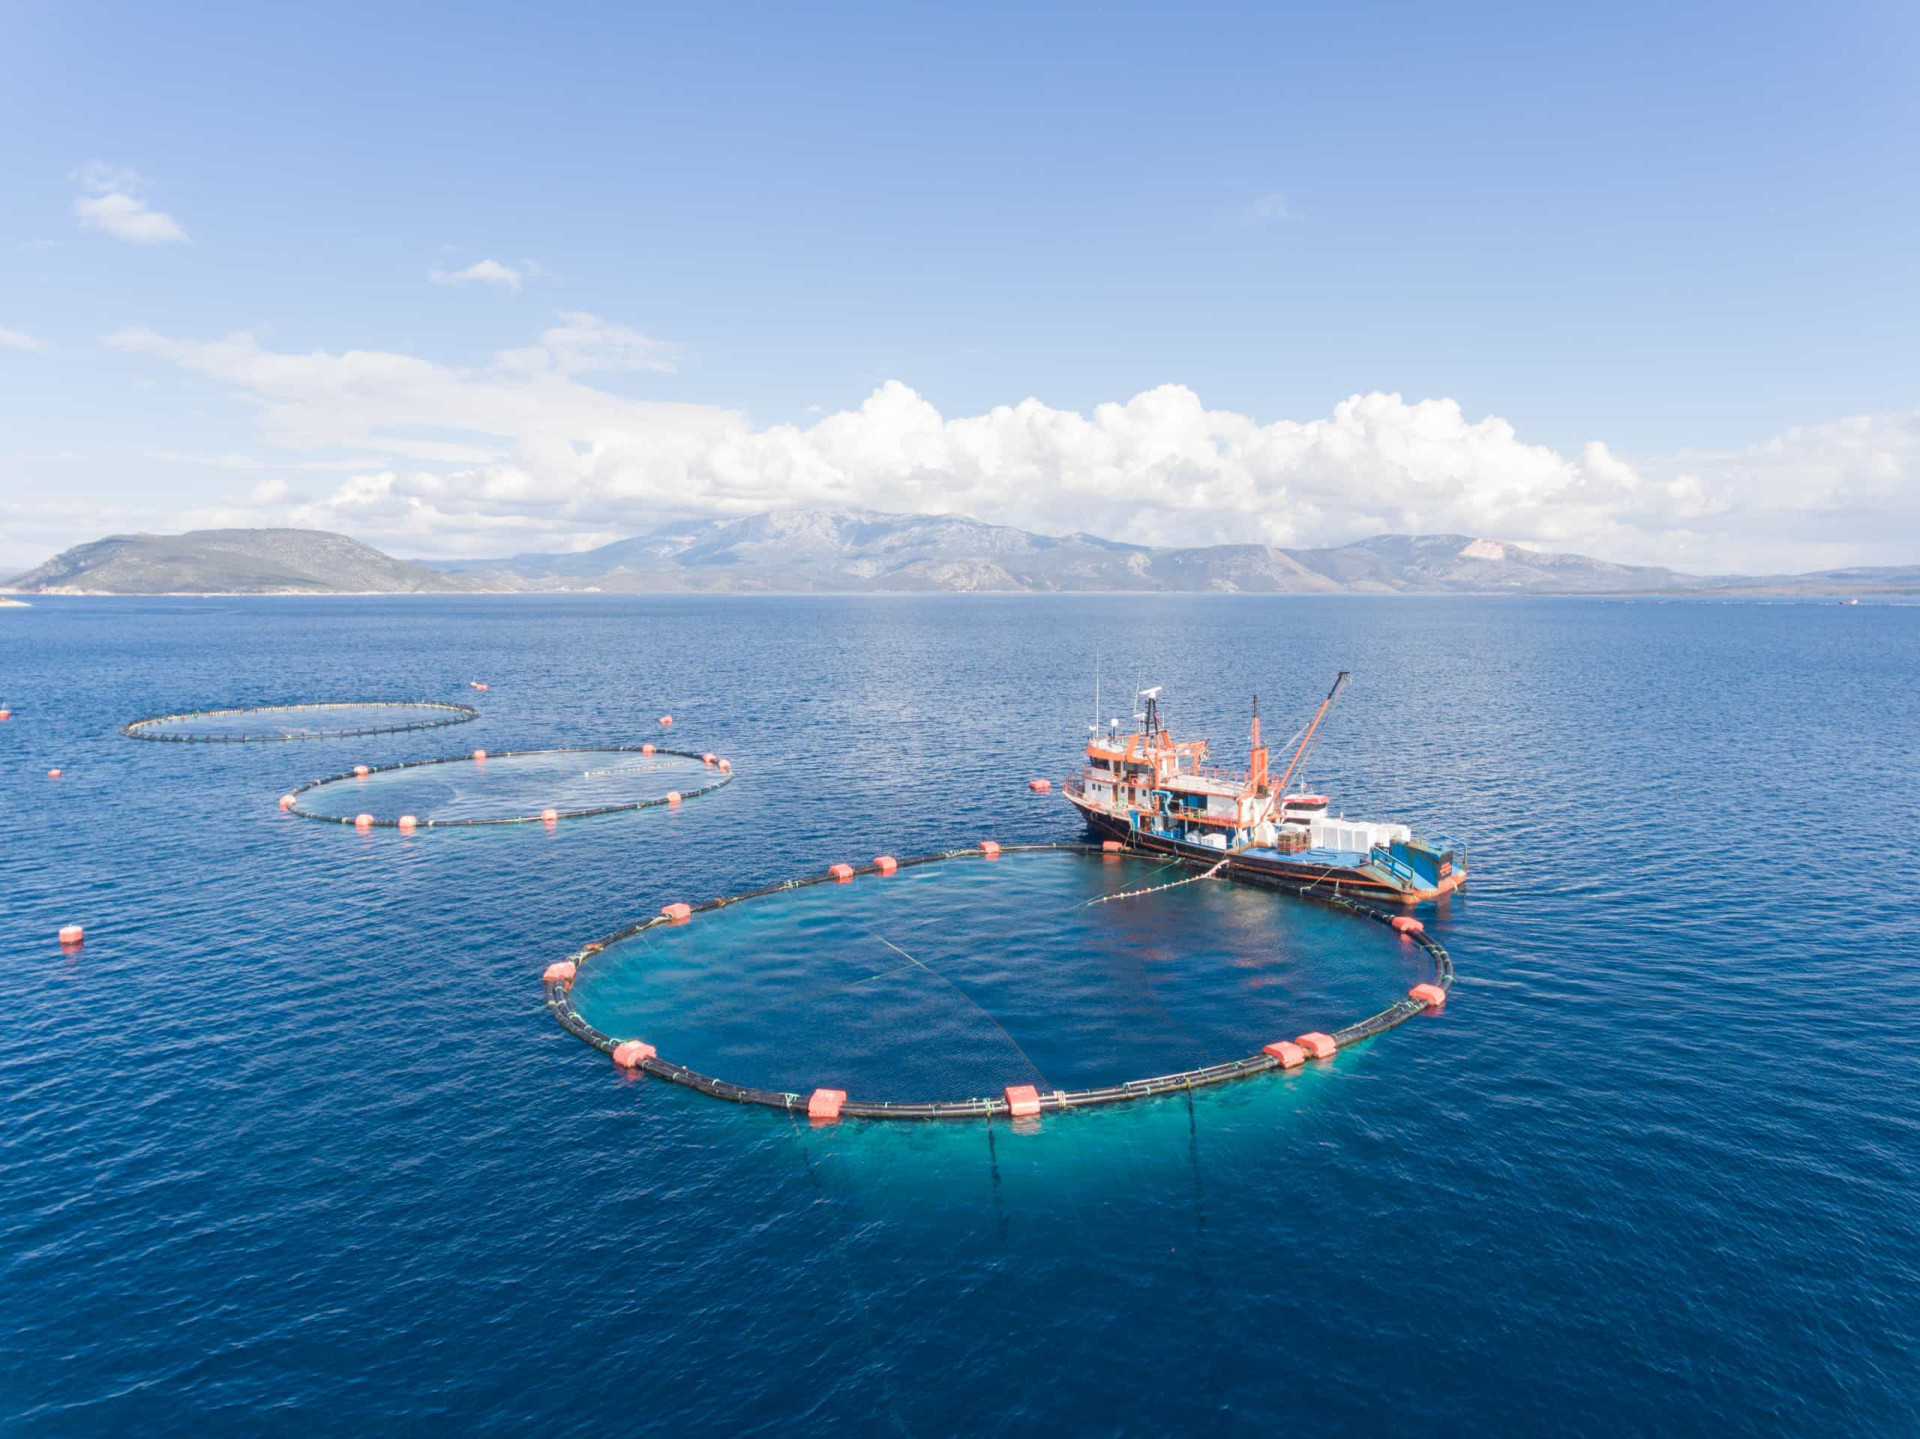 <p>To address the concerning decrease in fish numbers, more high-quality tuna are now being bred in enclosed nets and nourished with smaller fish in the ocean.</p><p><a href="https://www.msn.com/en-us/community/channel/vid-7xx8mnucu55yw63we9va2gwr7uihbxwc68fxqp25x6tg4ftibpra?cvid=94631541bc0f4f89bfd59158d696ad7e">Follow us and access great exclusive content every day</a></p>